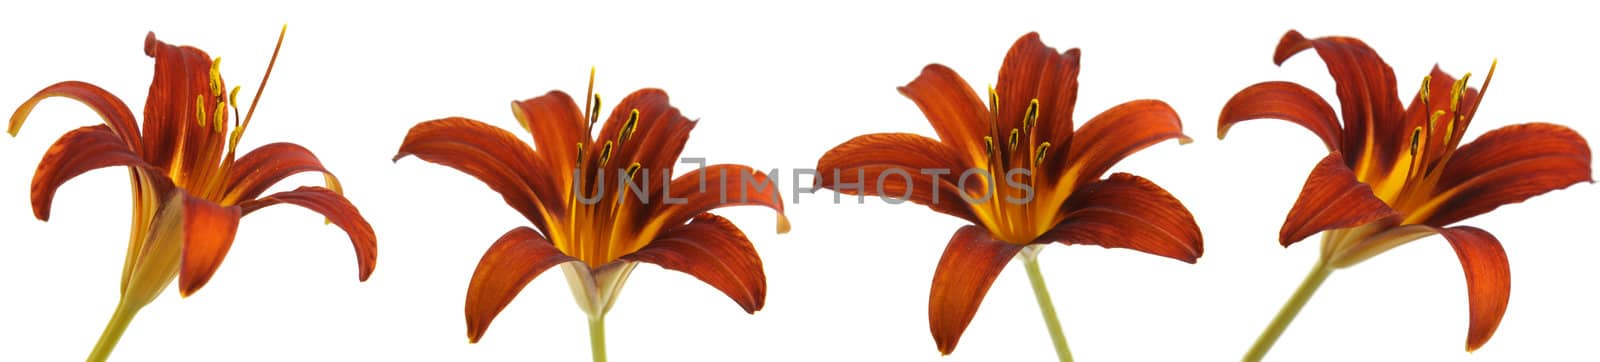 Multiple shots of a orange red lily (Lilium) isolated on white.
